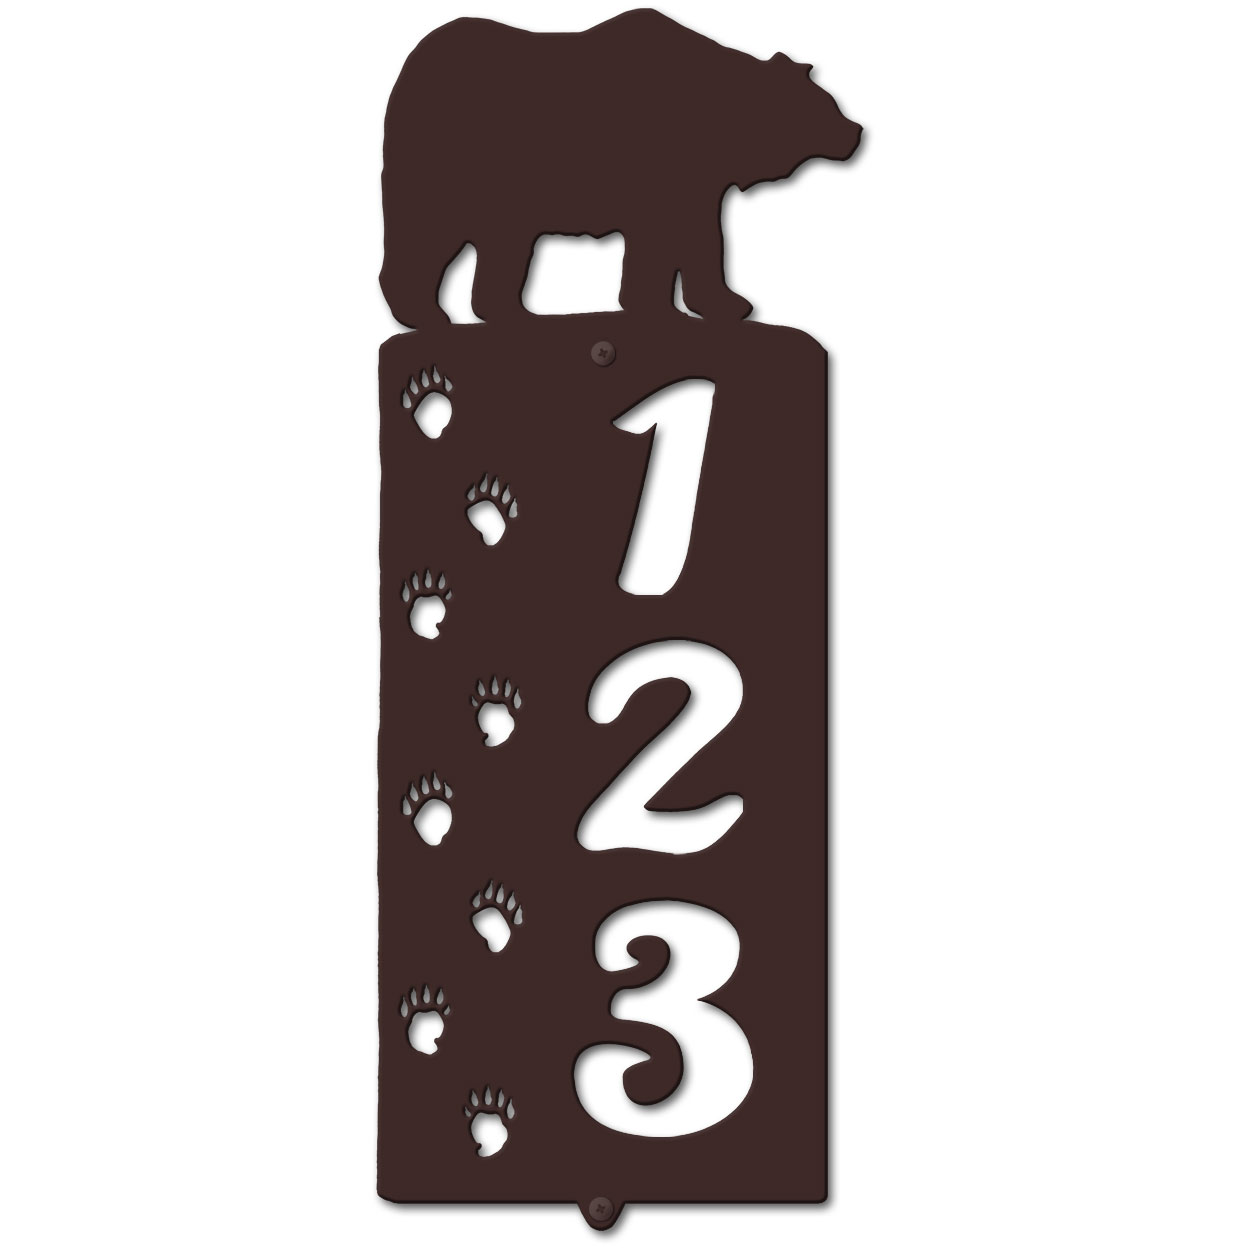 636023 - Bear Tracks Cut Outs Three Digit Address Number Plaque